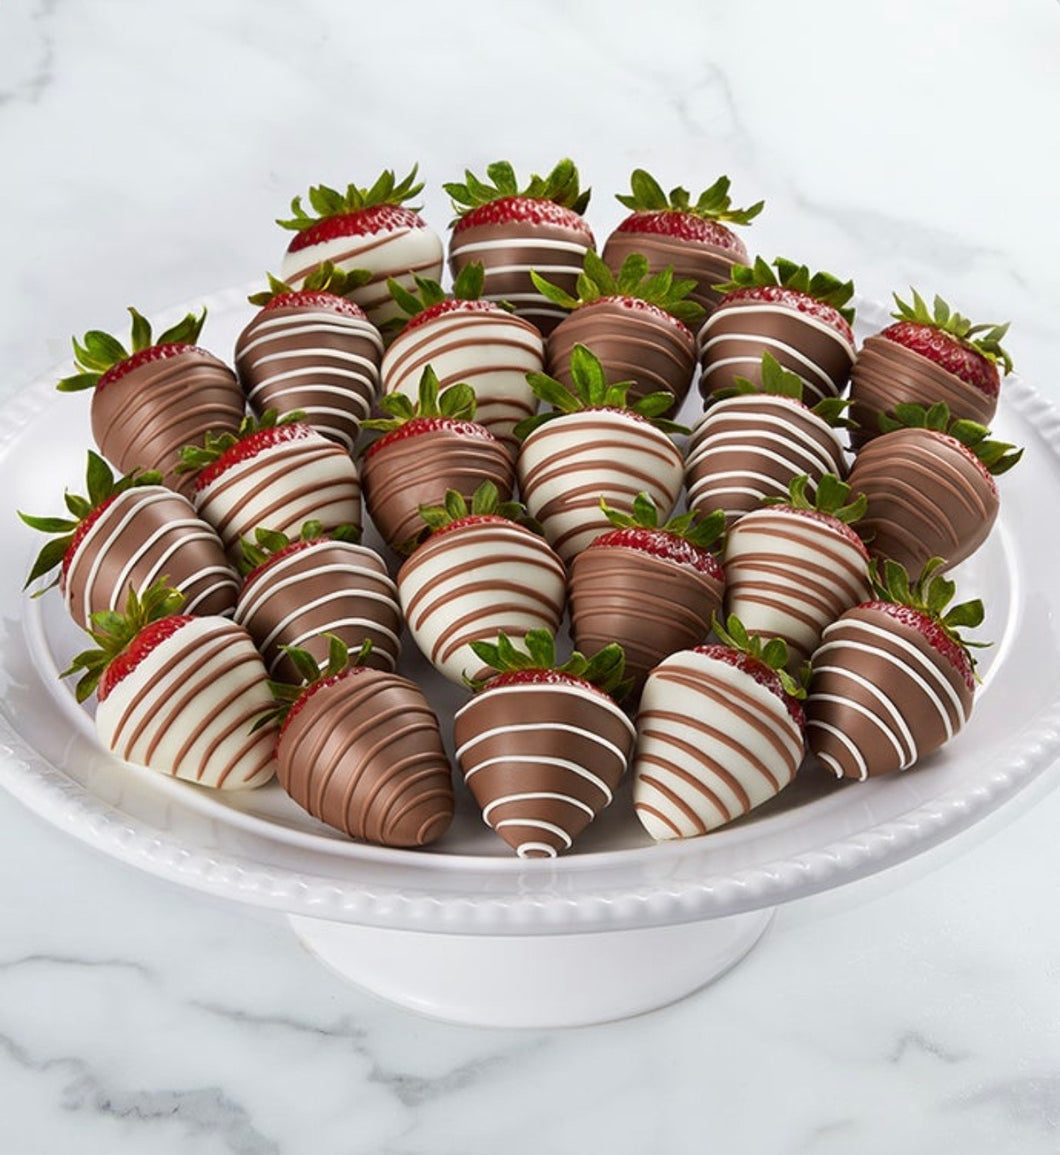 Gourmet Drizzle Chocolate Covered Strawberries